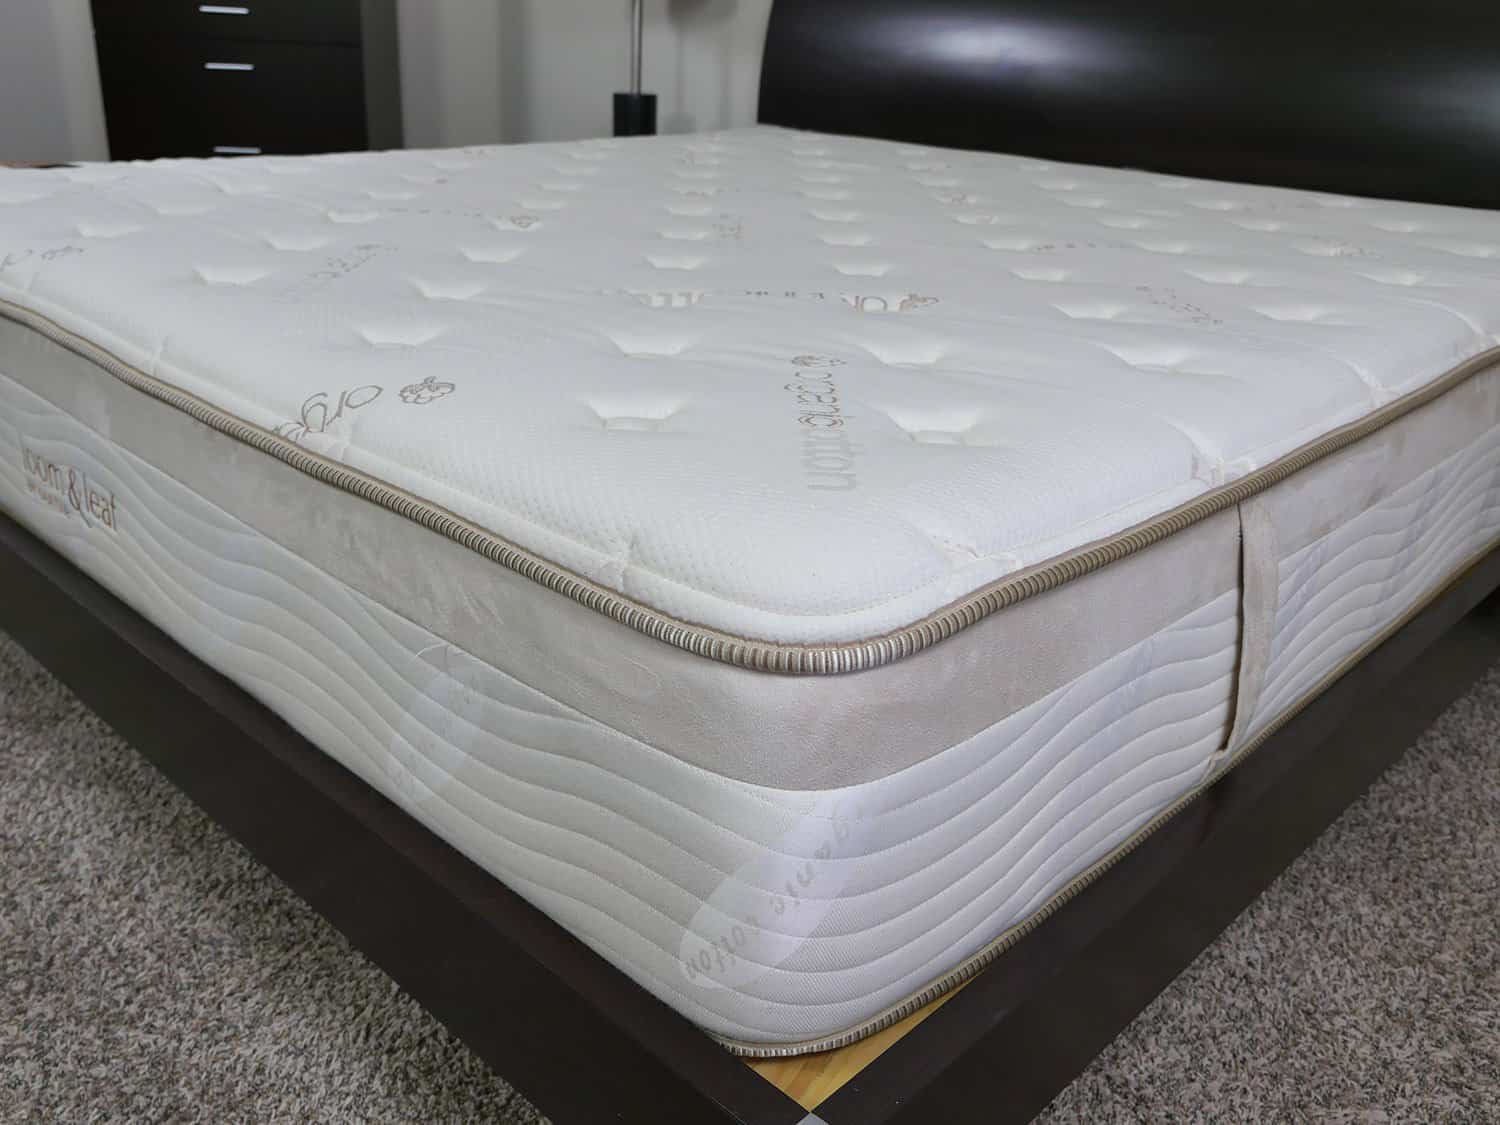 loom and leaf mattress protector